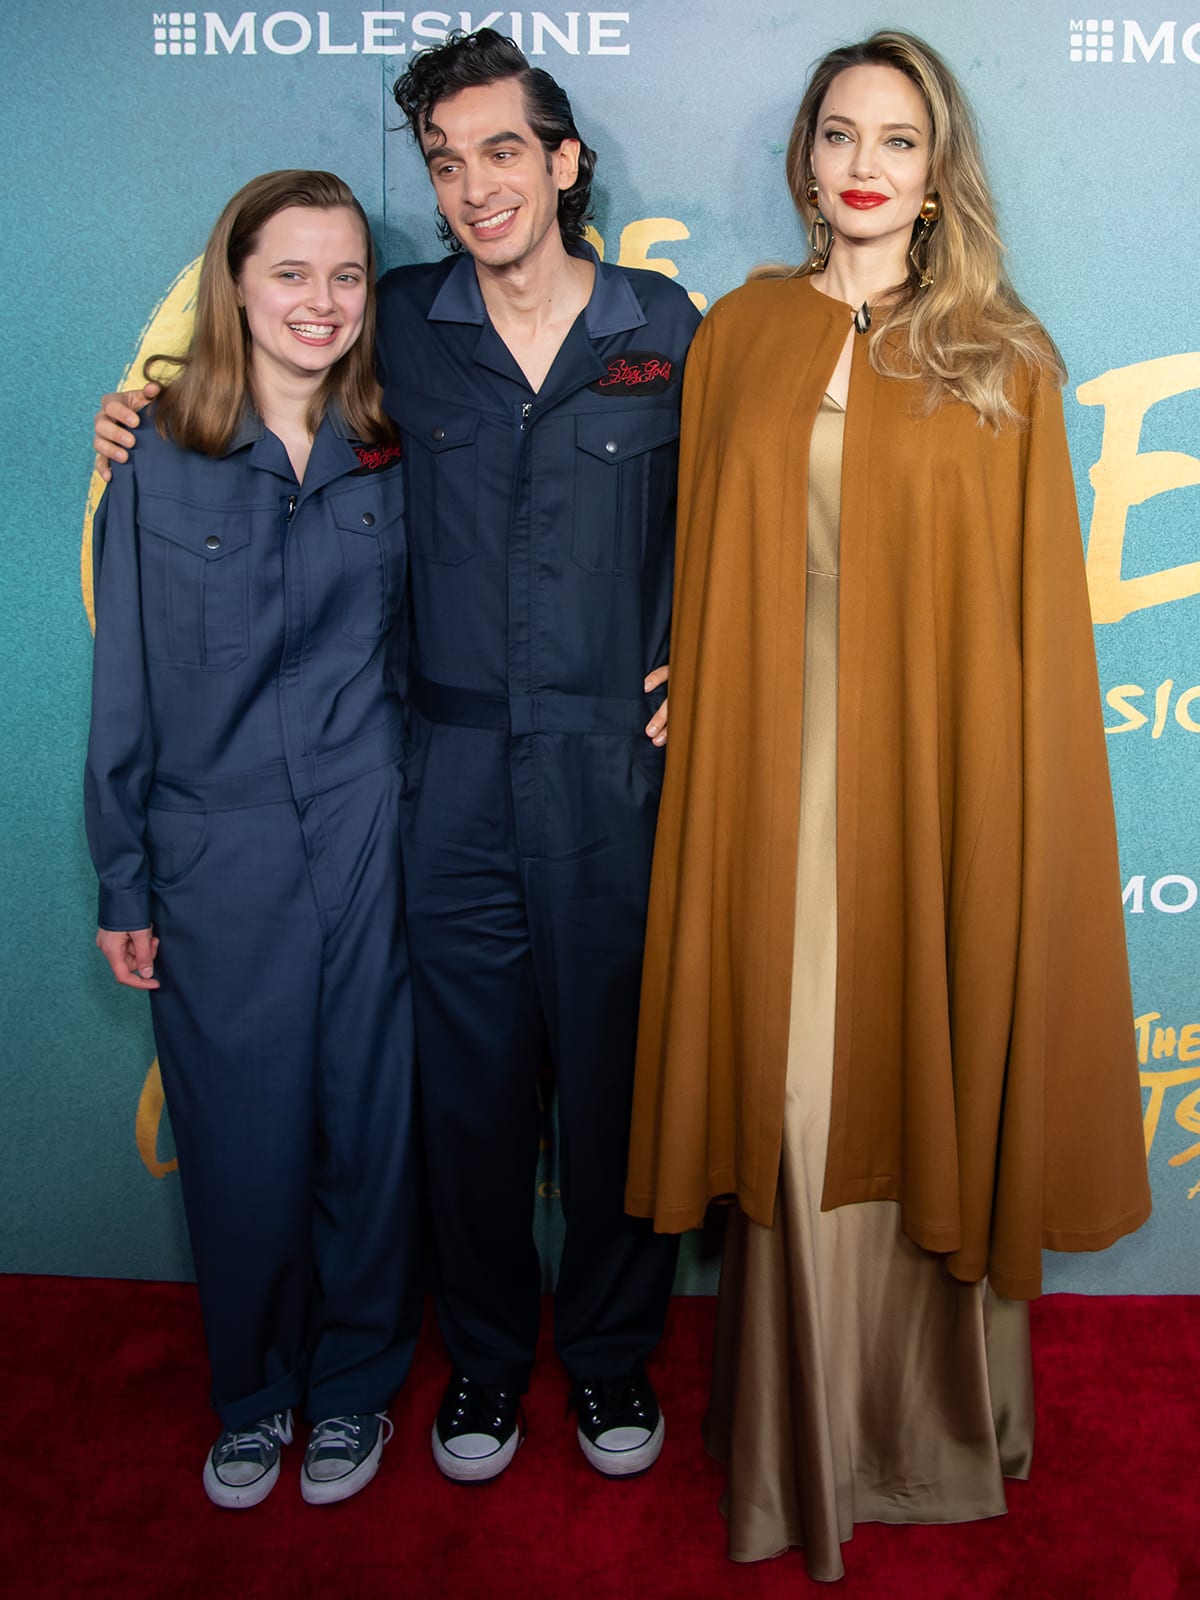 Vivienne Jolie-Pitt matches with composer-writer Justin Levine in a navy blue jumpsuit as a reference to the musical, while Angelina Jolie keeps a majestic look in a gold gown